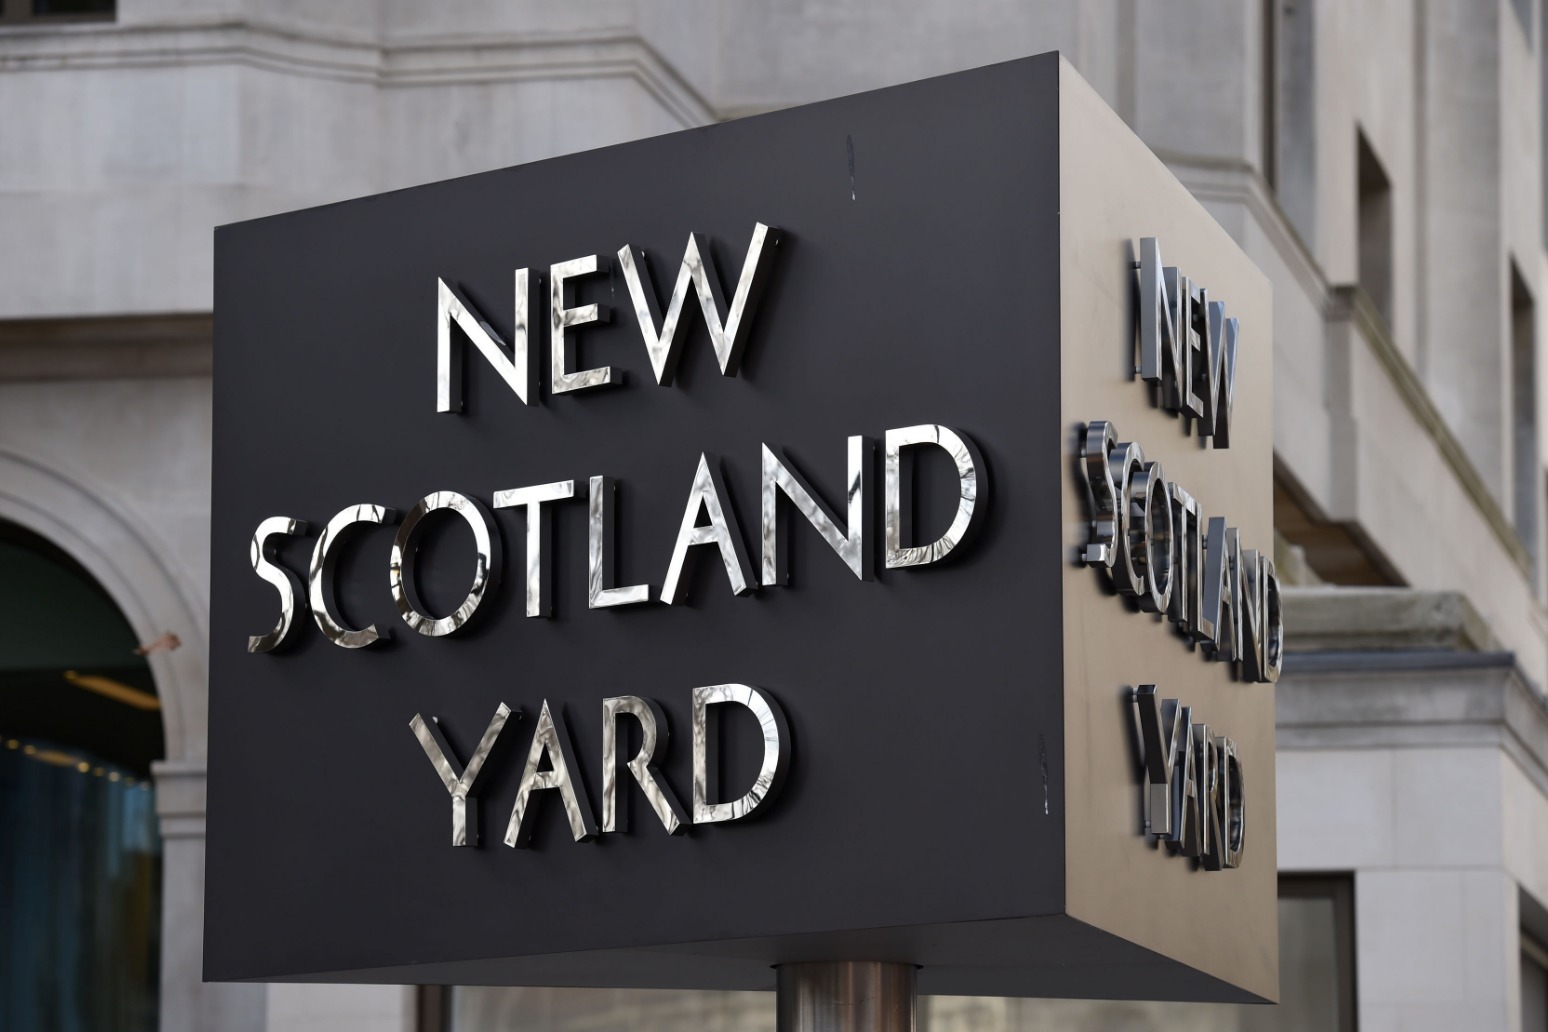 Metropolitan Police officer charged with sexually assaulting colleague on duty 